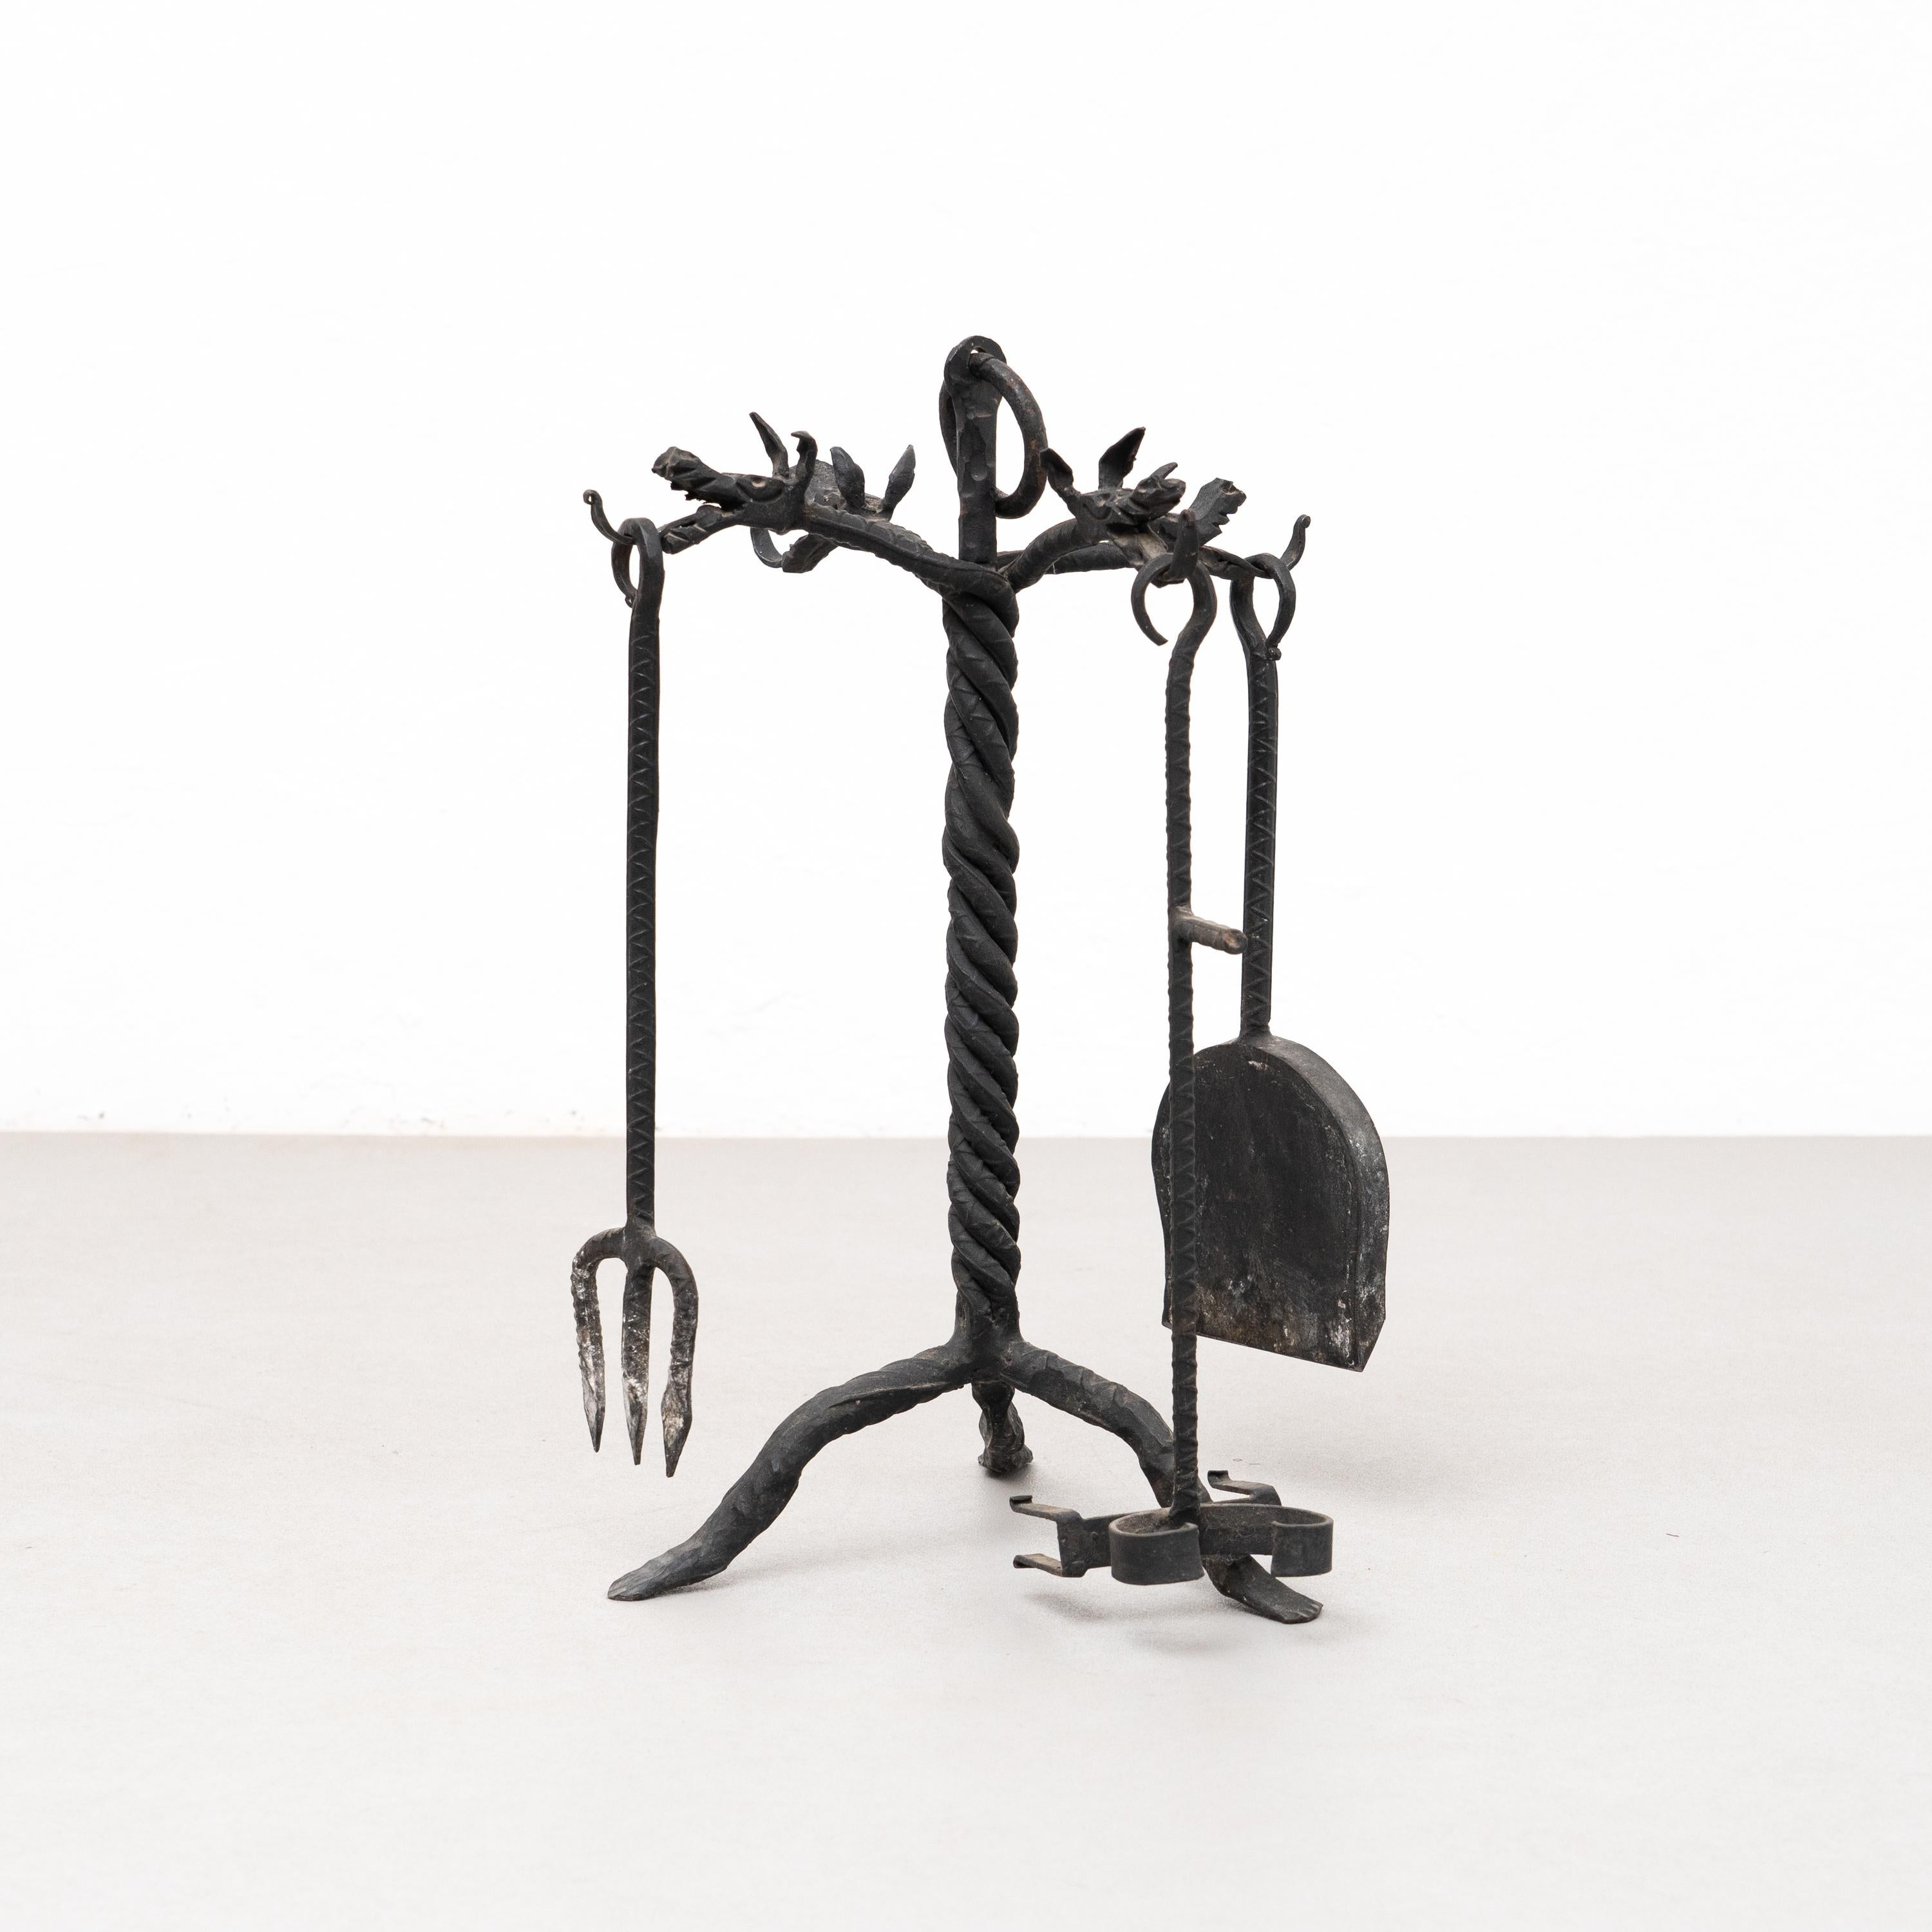 Metal Fireplace Tools.

Made by unknown manufacturer in Spain, circa 1940.

In original condition, with minor wear consistent with age and use, preserving a beautiful patina. 

Materials:
Metal.